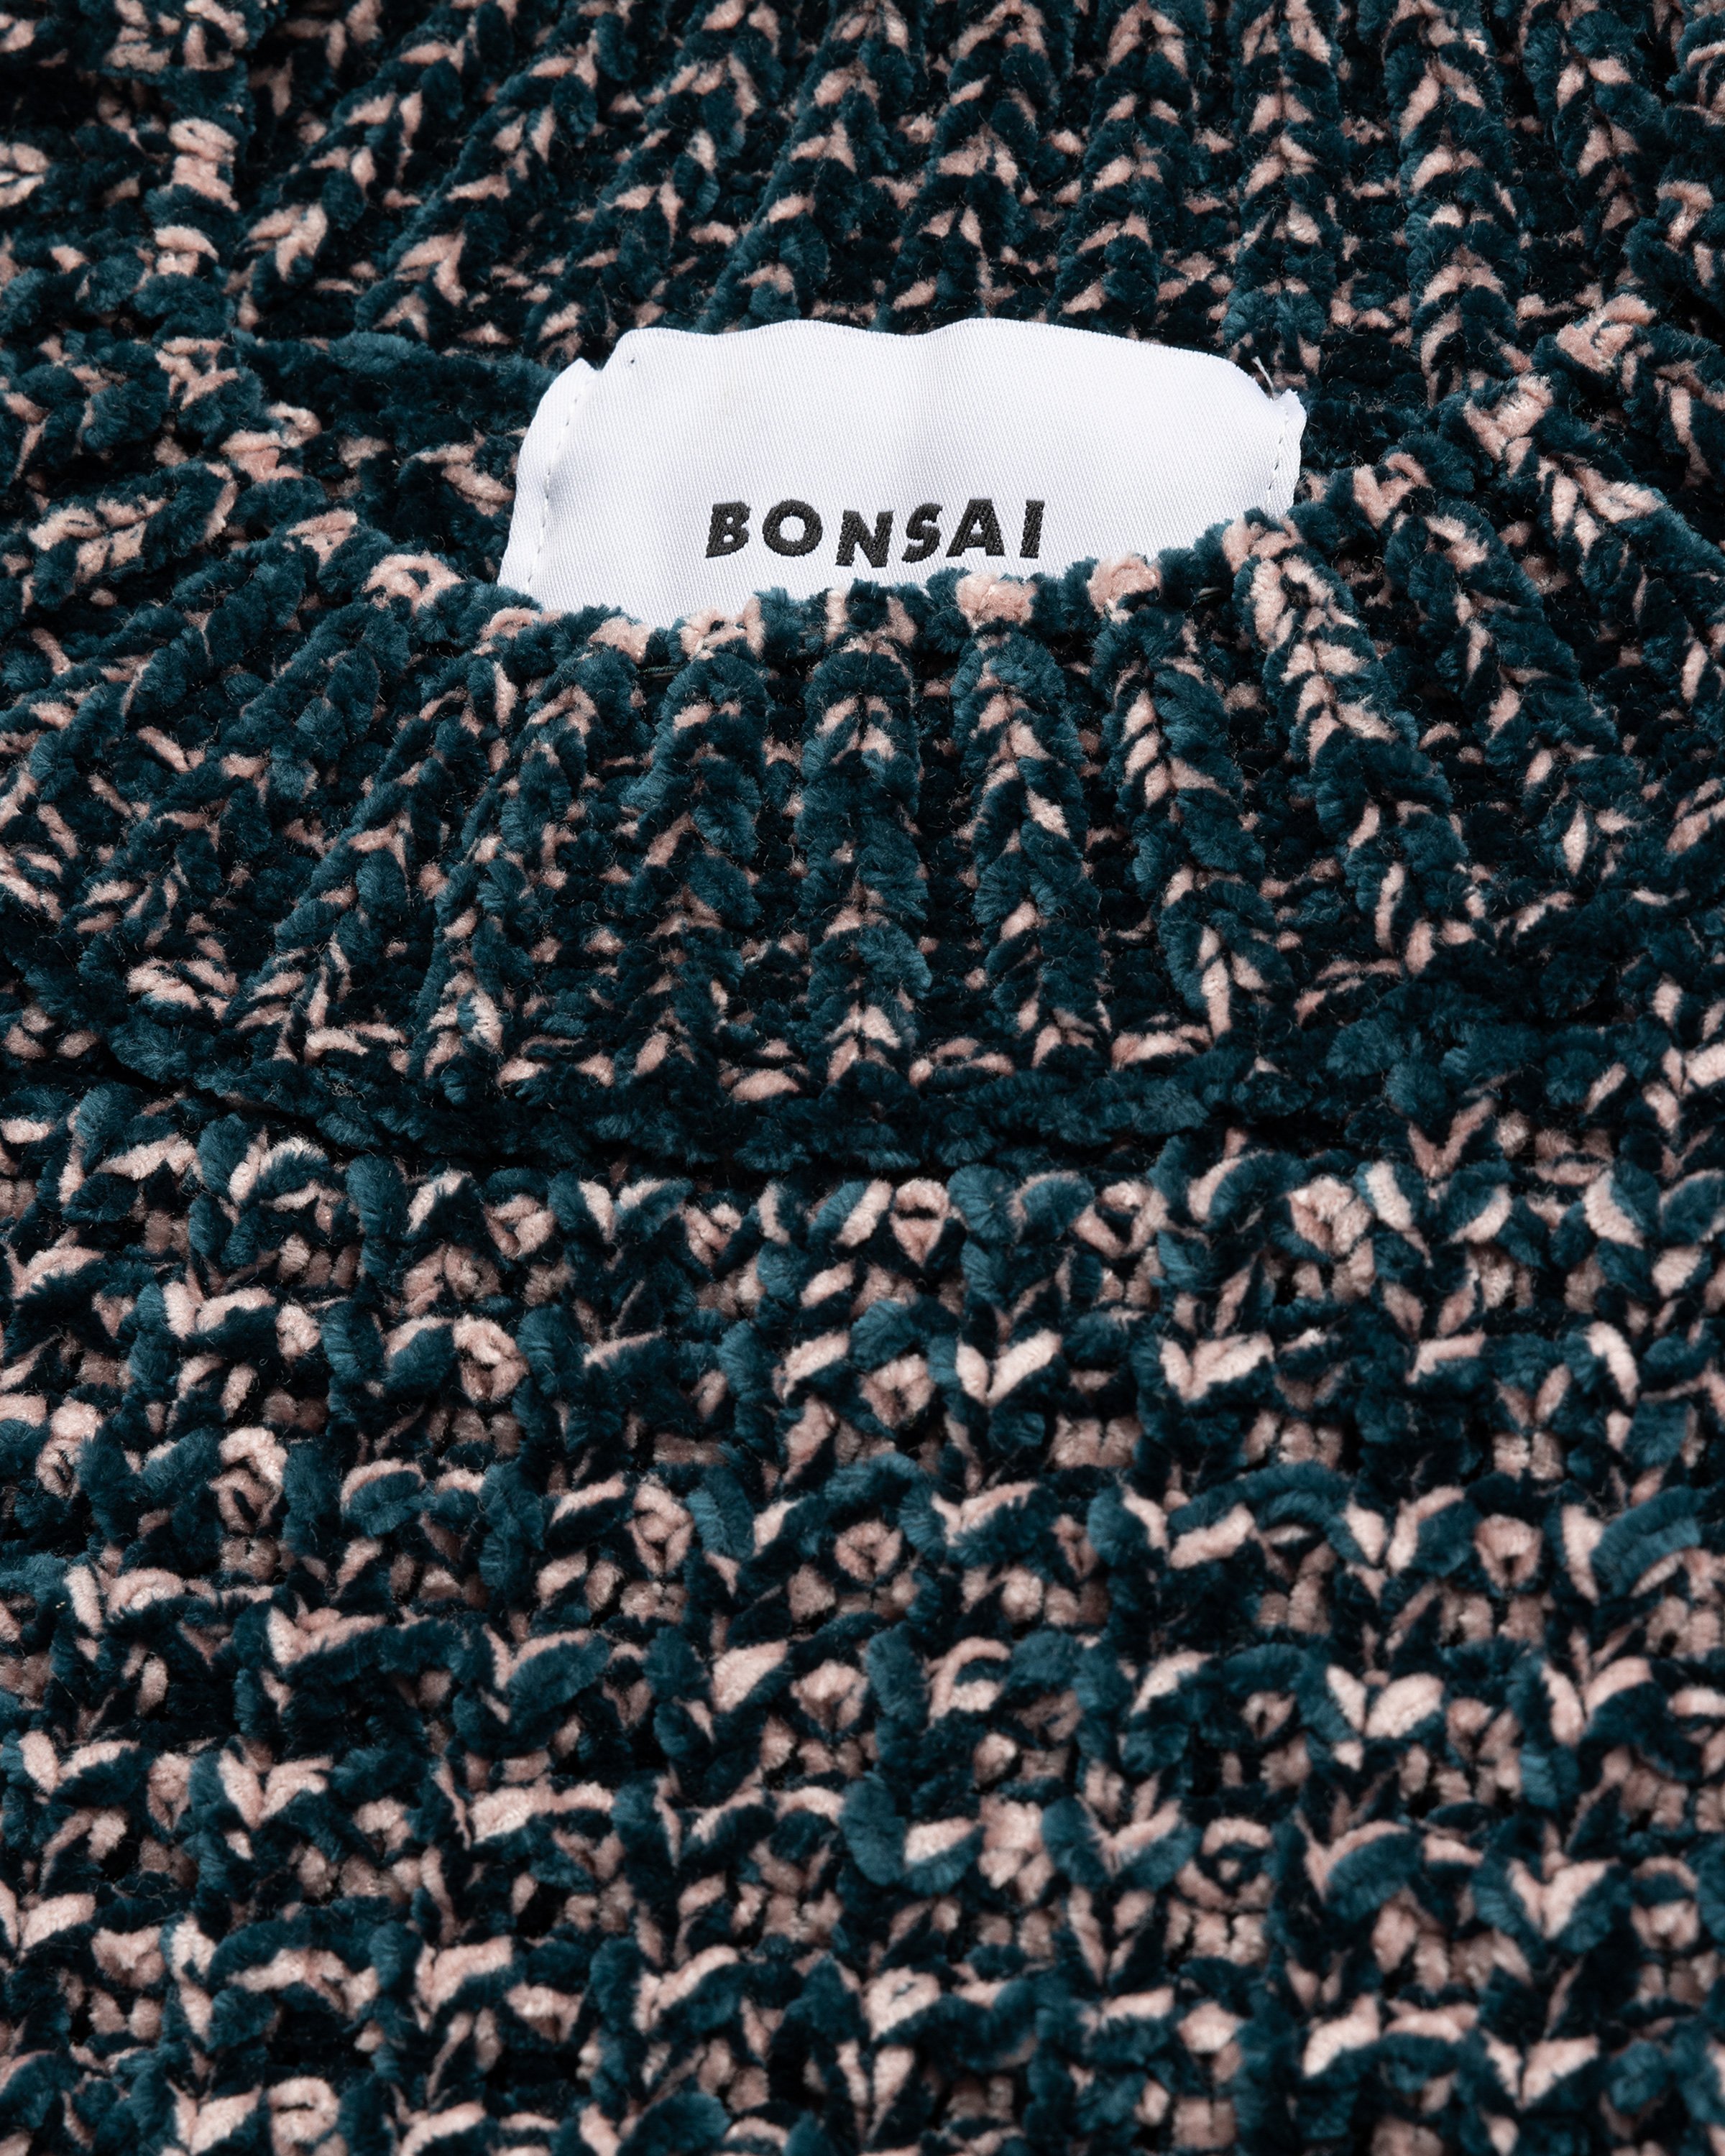 Bonsai - KNIT PRINTED CINILLE CREWNECK SWEATER, OVERSIZE CROP FIT Blue - Clothing - Blue - Image 5